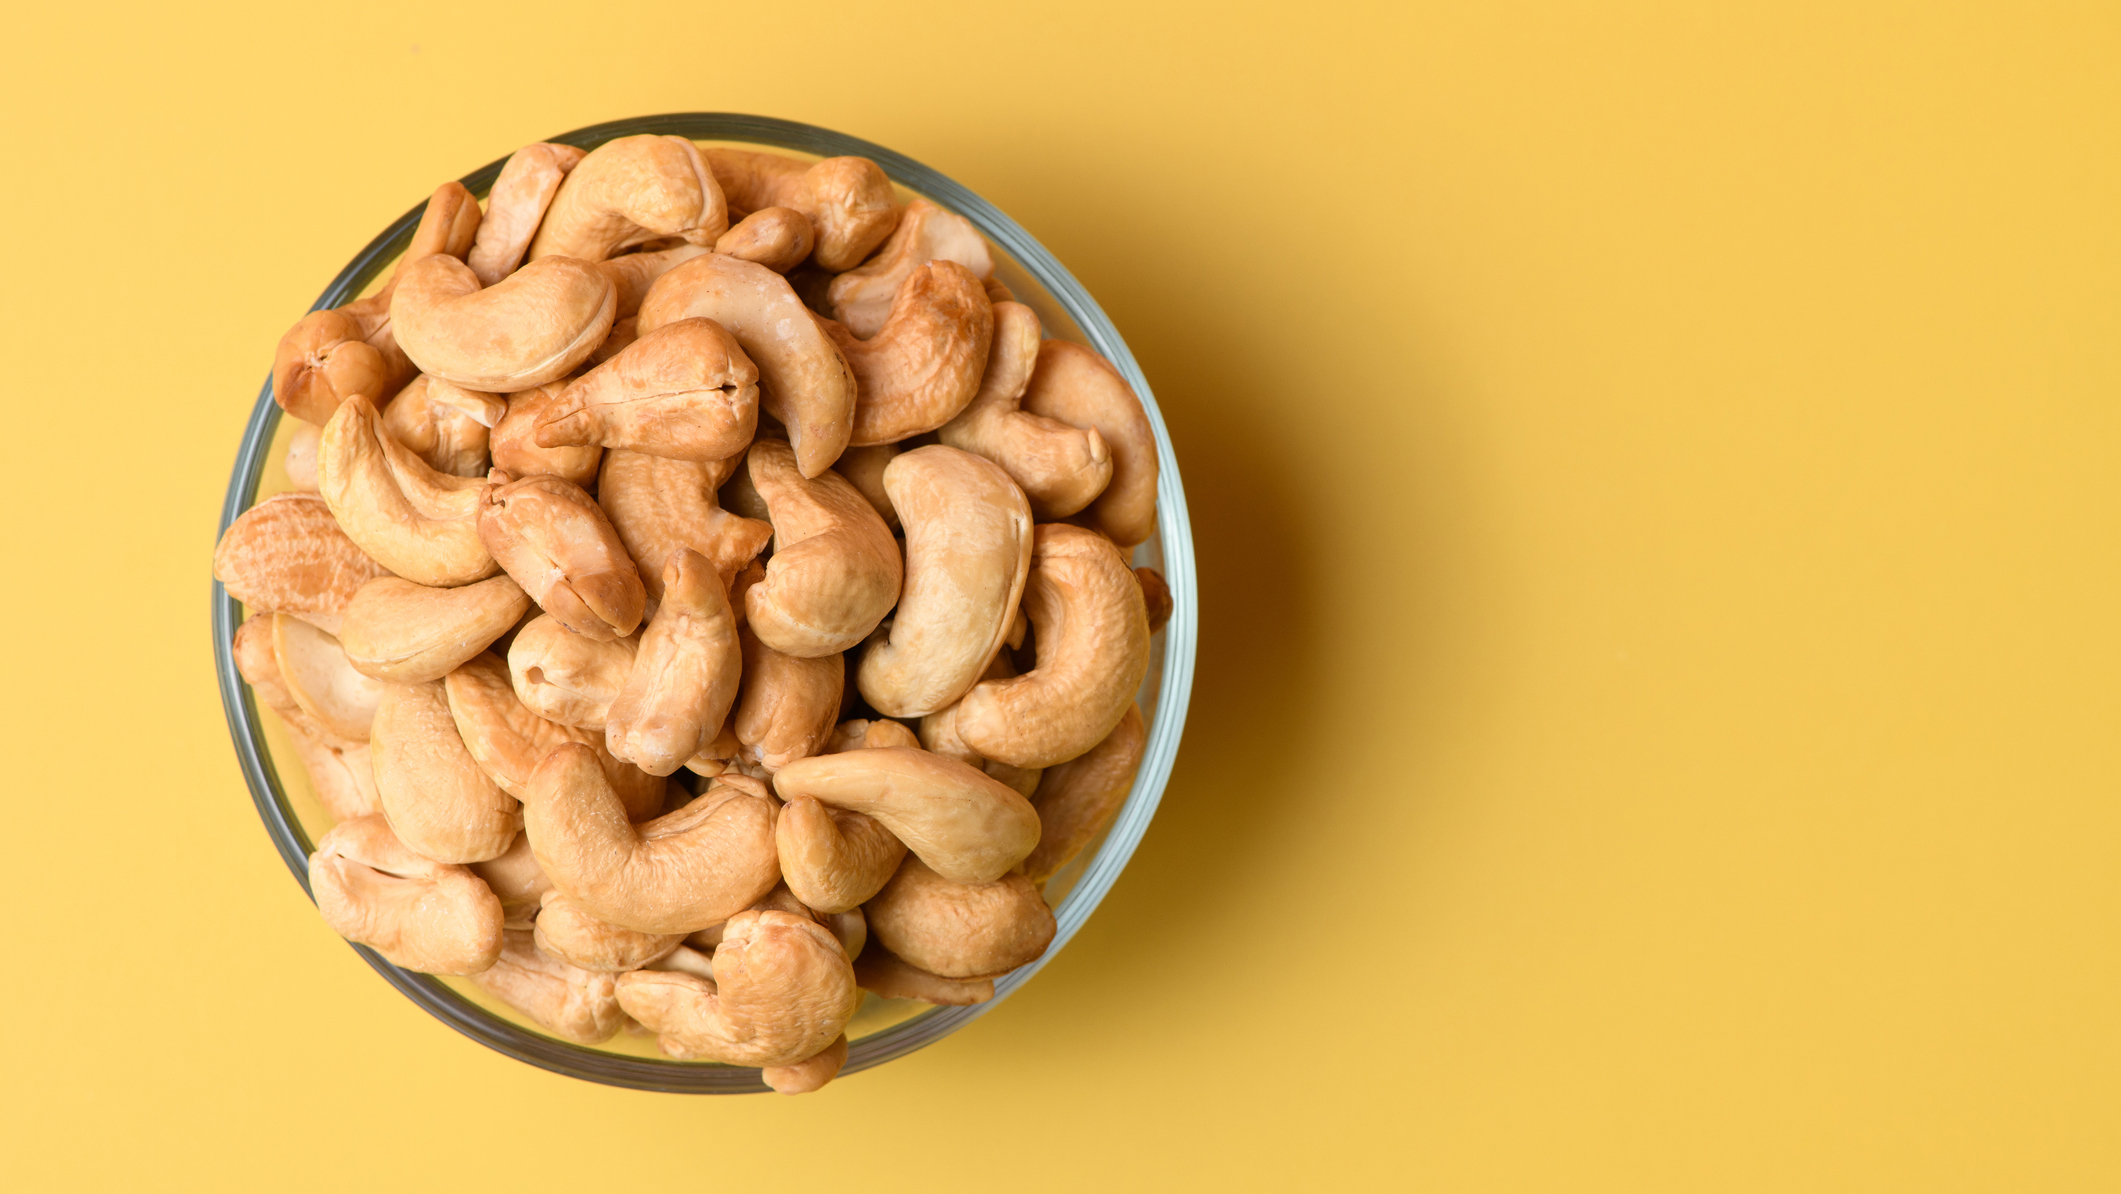 A bowl of cashew nuts on a yellow background